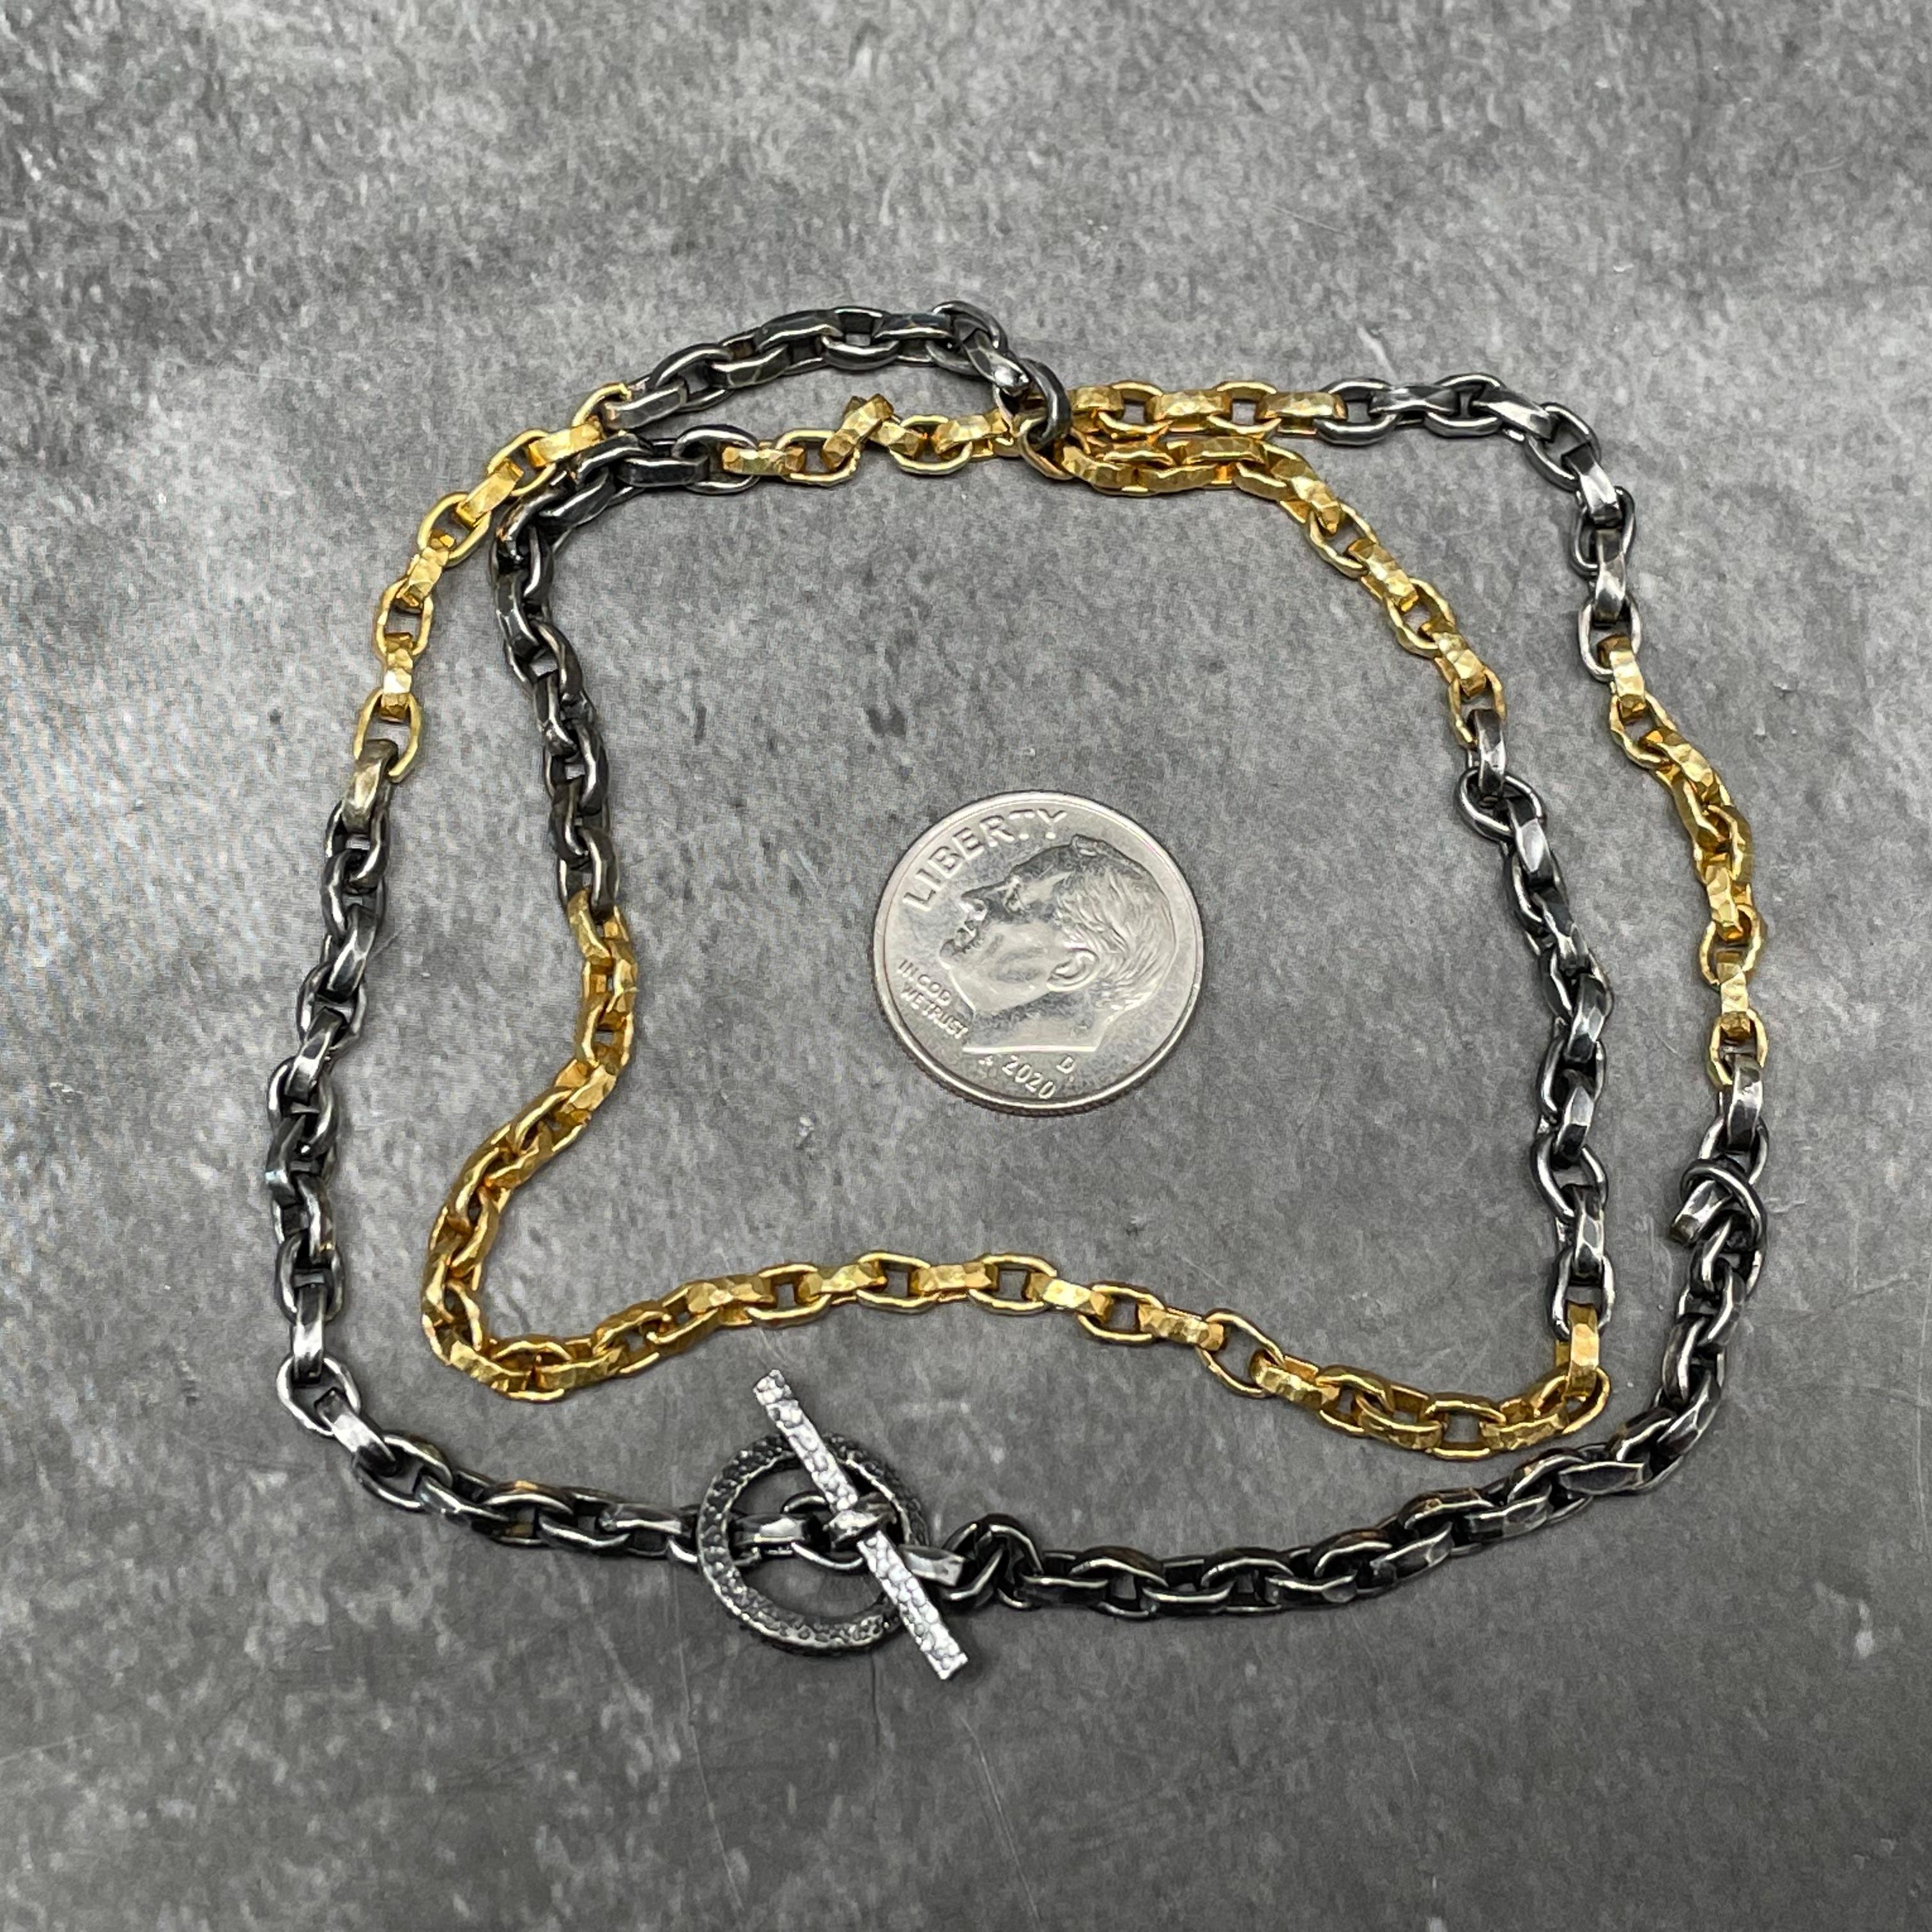 A handmade chain with organic hammered links of alternating 18K yellow gold and dark oxidized silver is a beautiful piece all by itself, or used with a pendant.  The links are approximately 1.5mm wide. There are 32 gold links at the bottom, with 12,